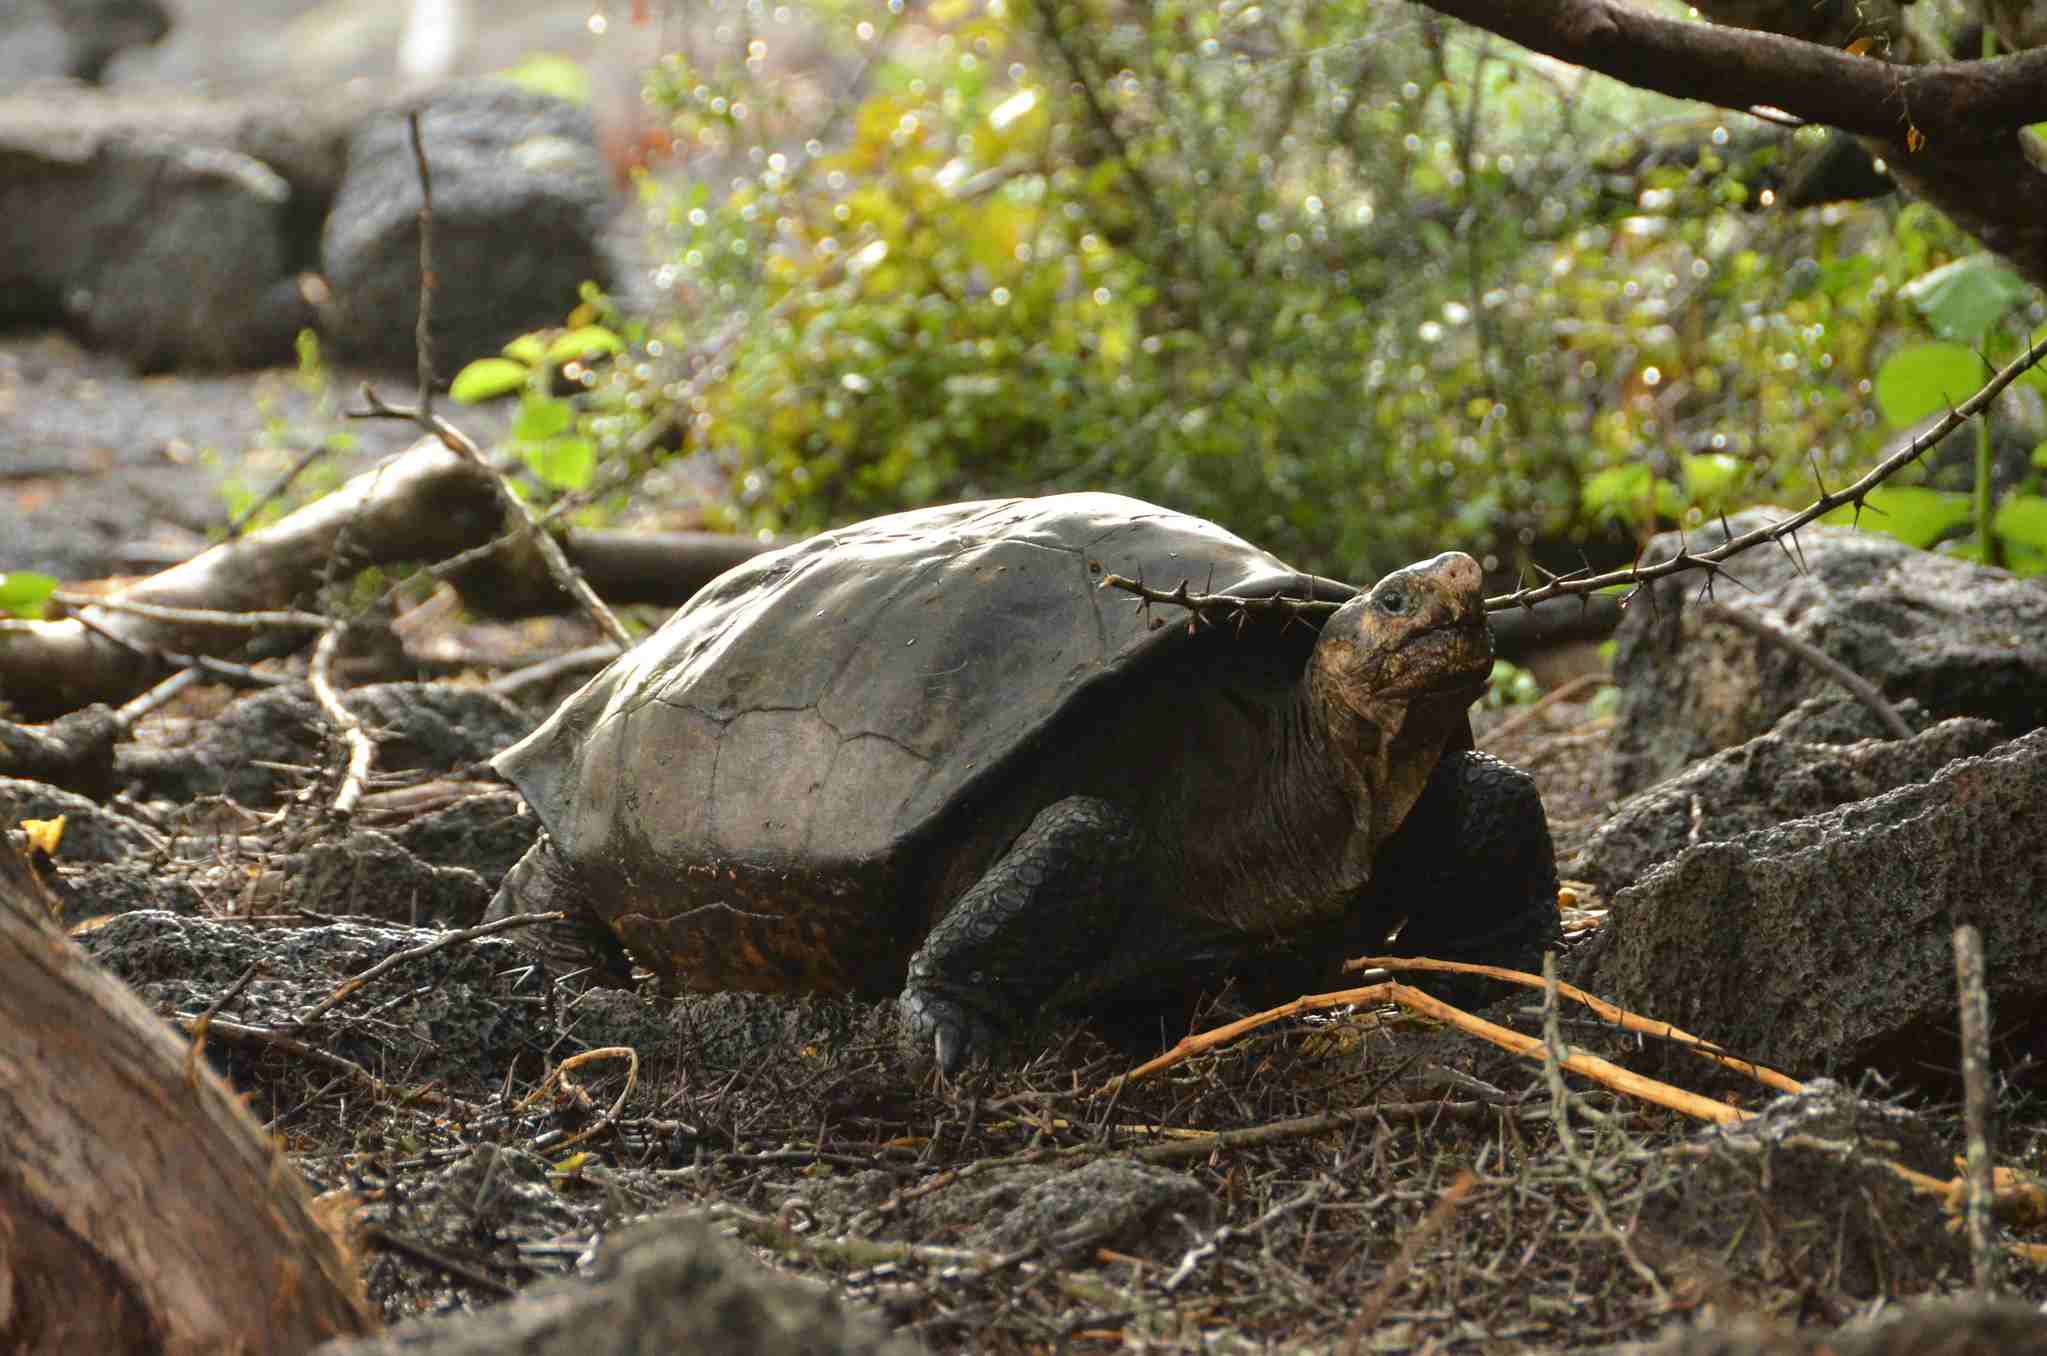 A Giant Tortoise Thought To Be Extinct Tortoise For Over A Century Has BeenDiscovered In The Galápagos Islands